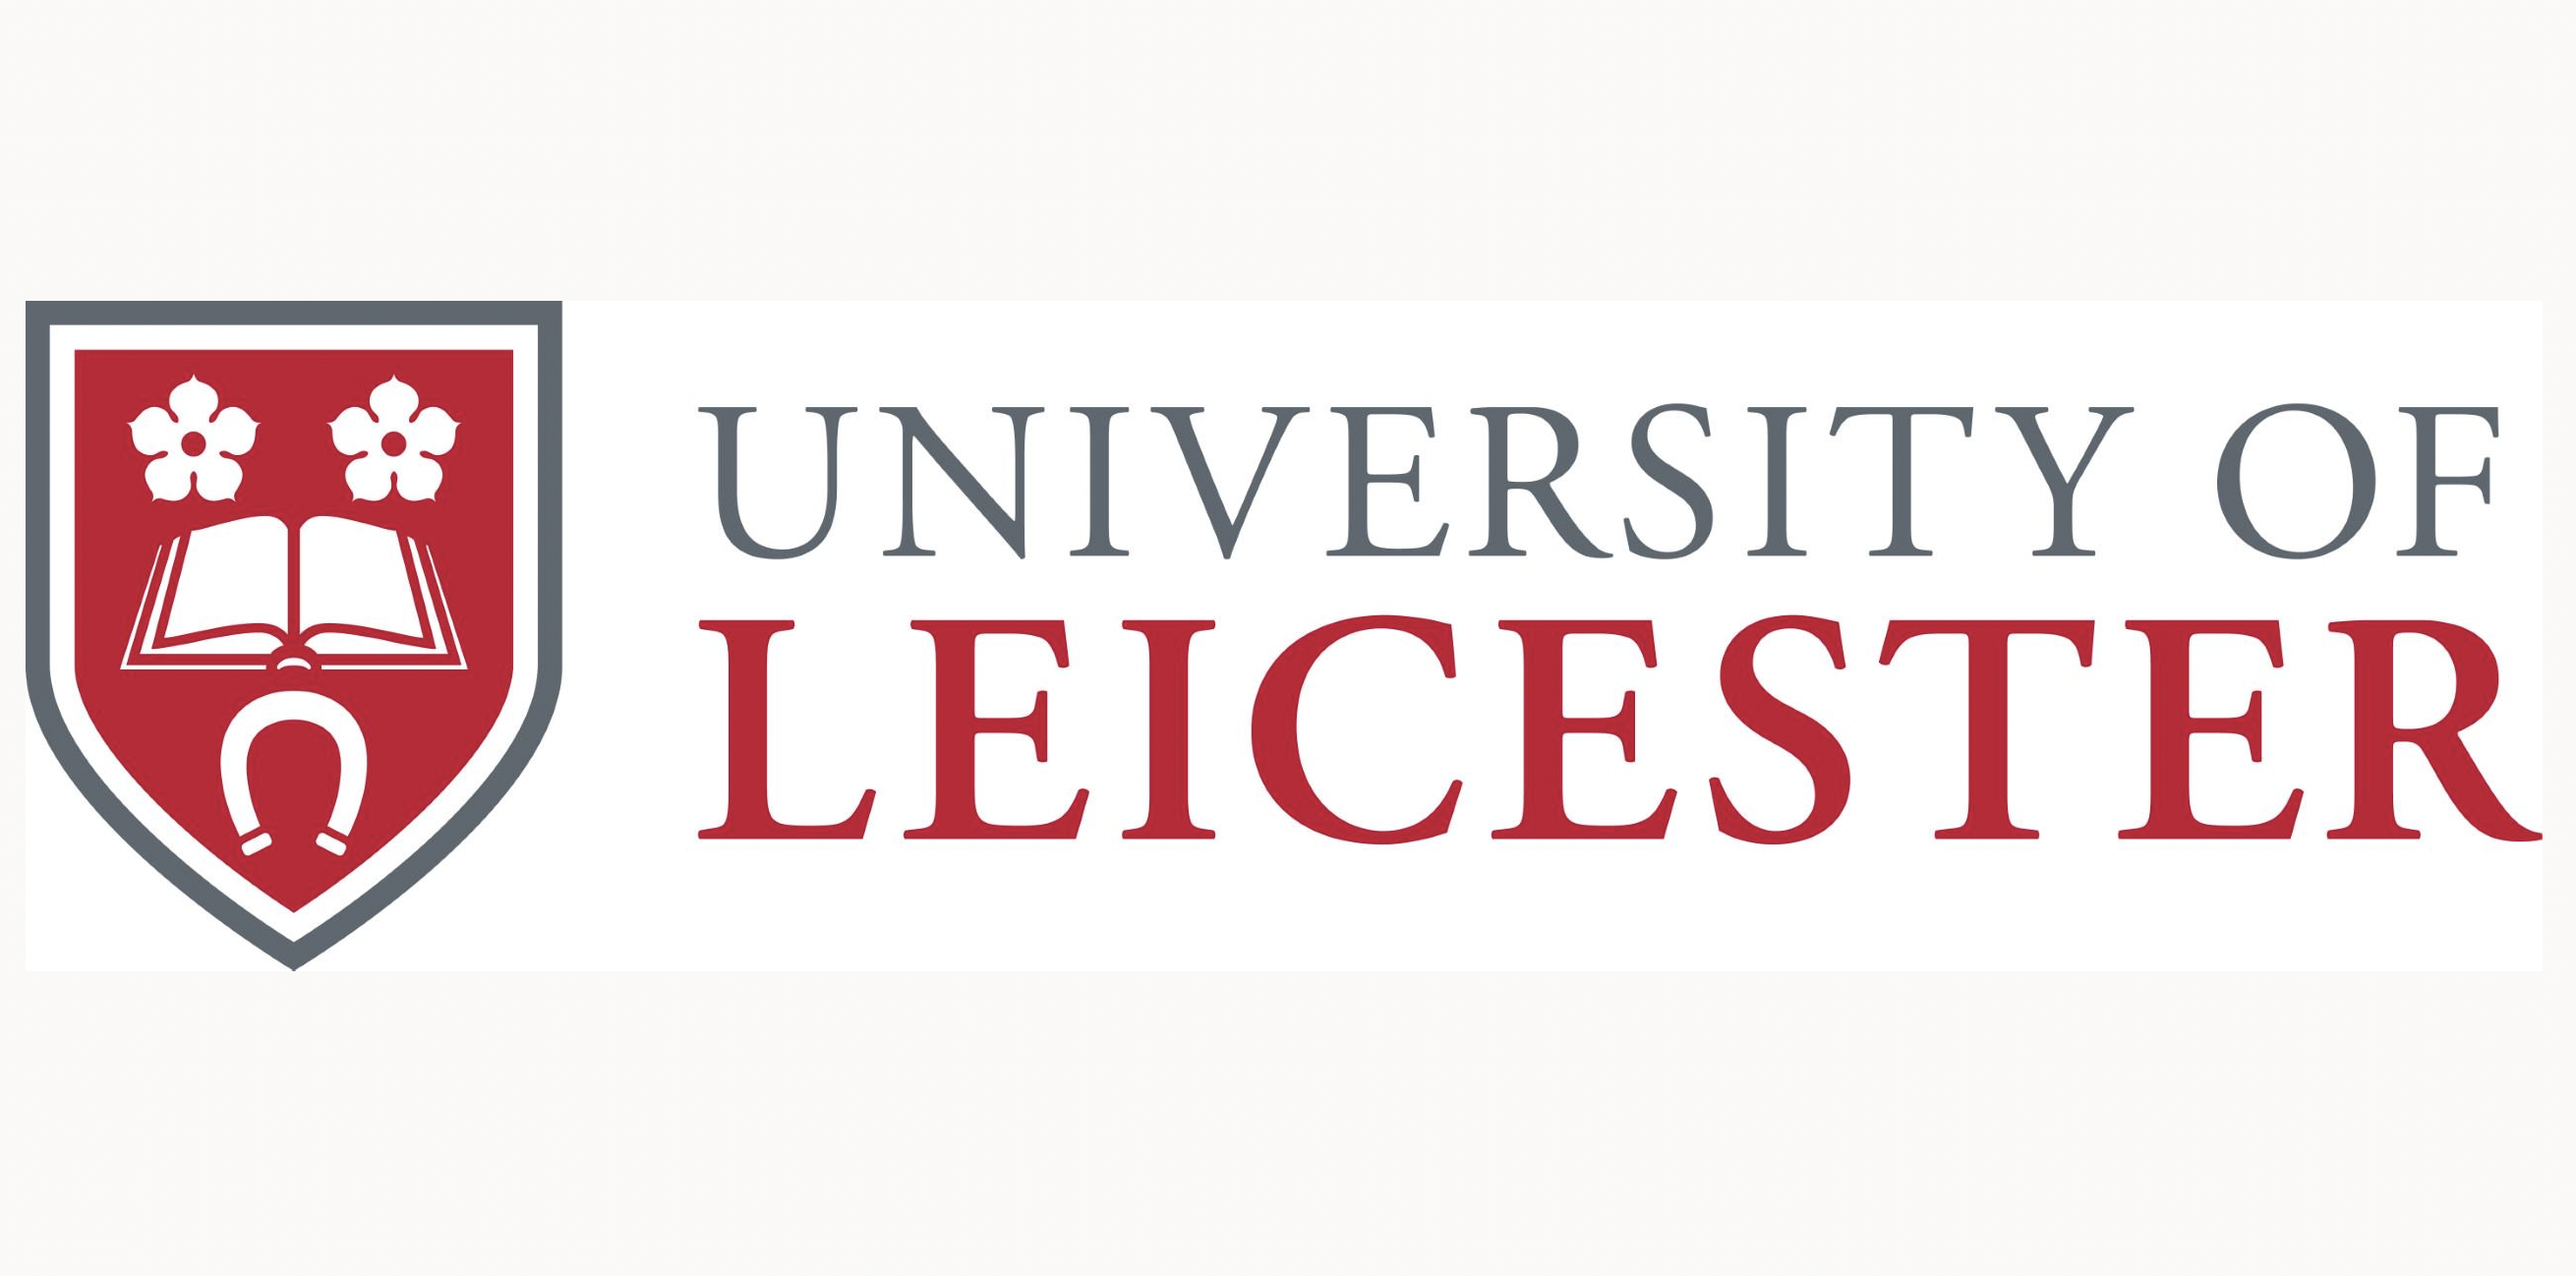 University of Leicester, study in Leicester, England, UK